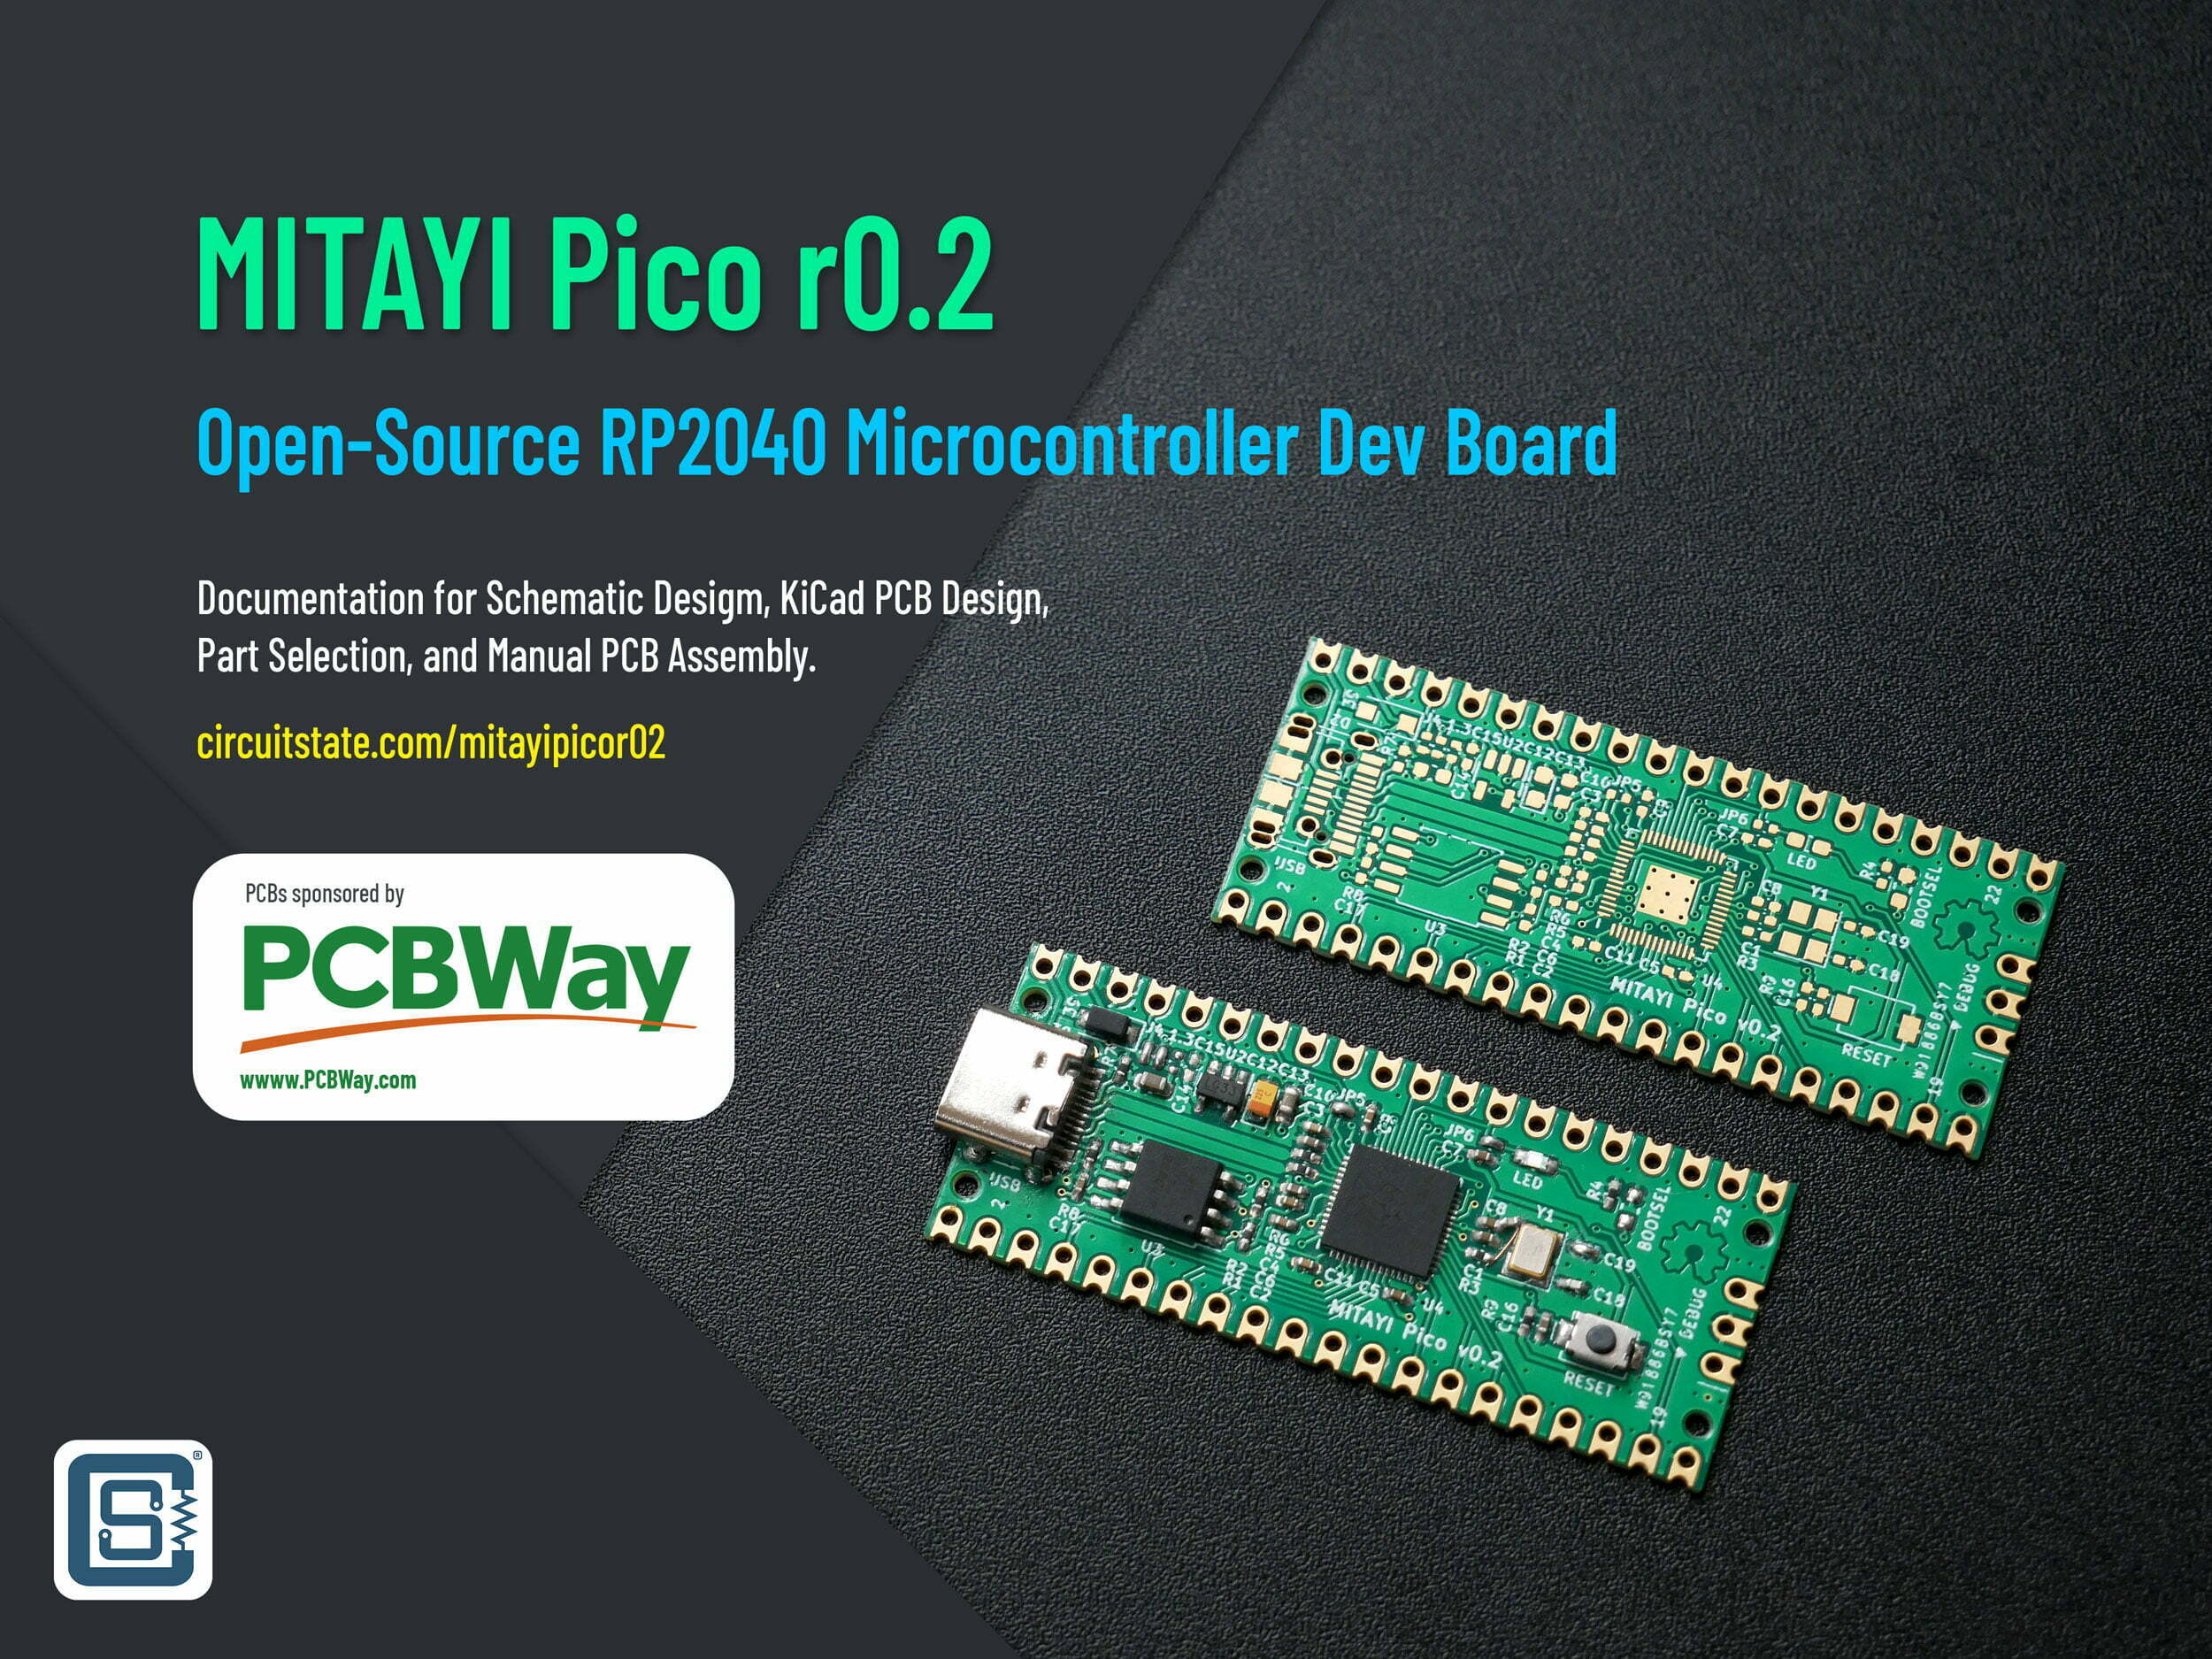 Mitayi-Pico-r0.2-Open-Source-RP2040-Microcontroller-Development-Board-CIRCUITSTATE-Electronics-Feature-Image-01-4